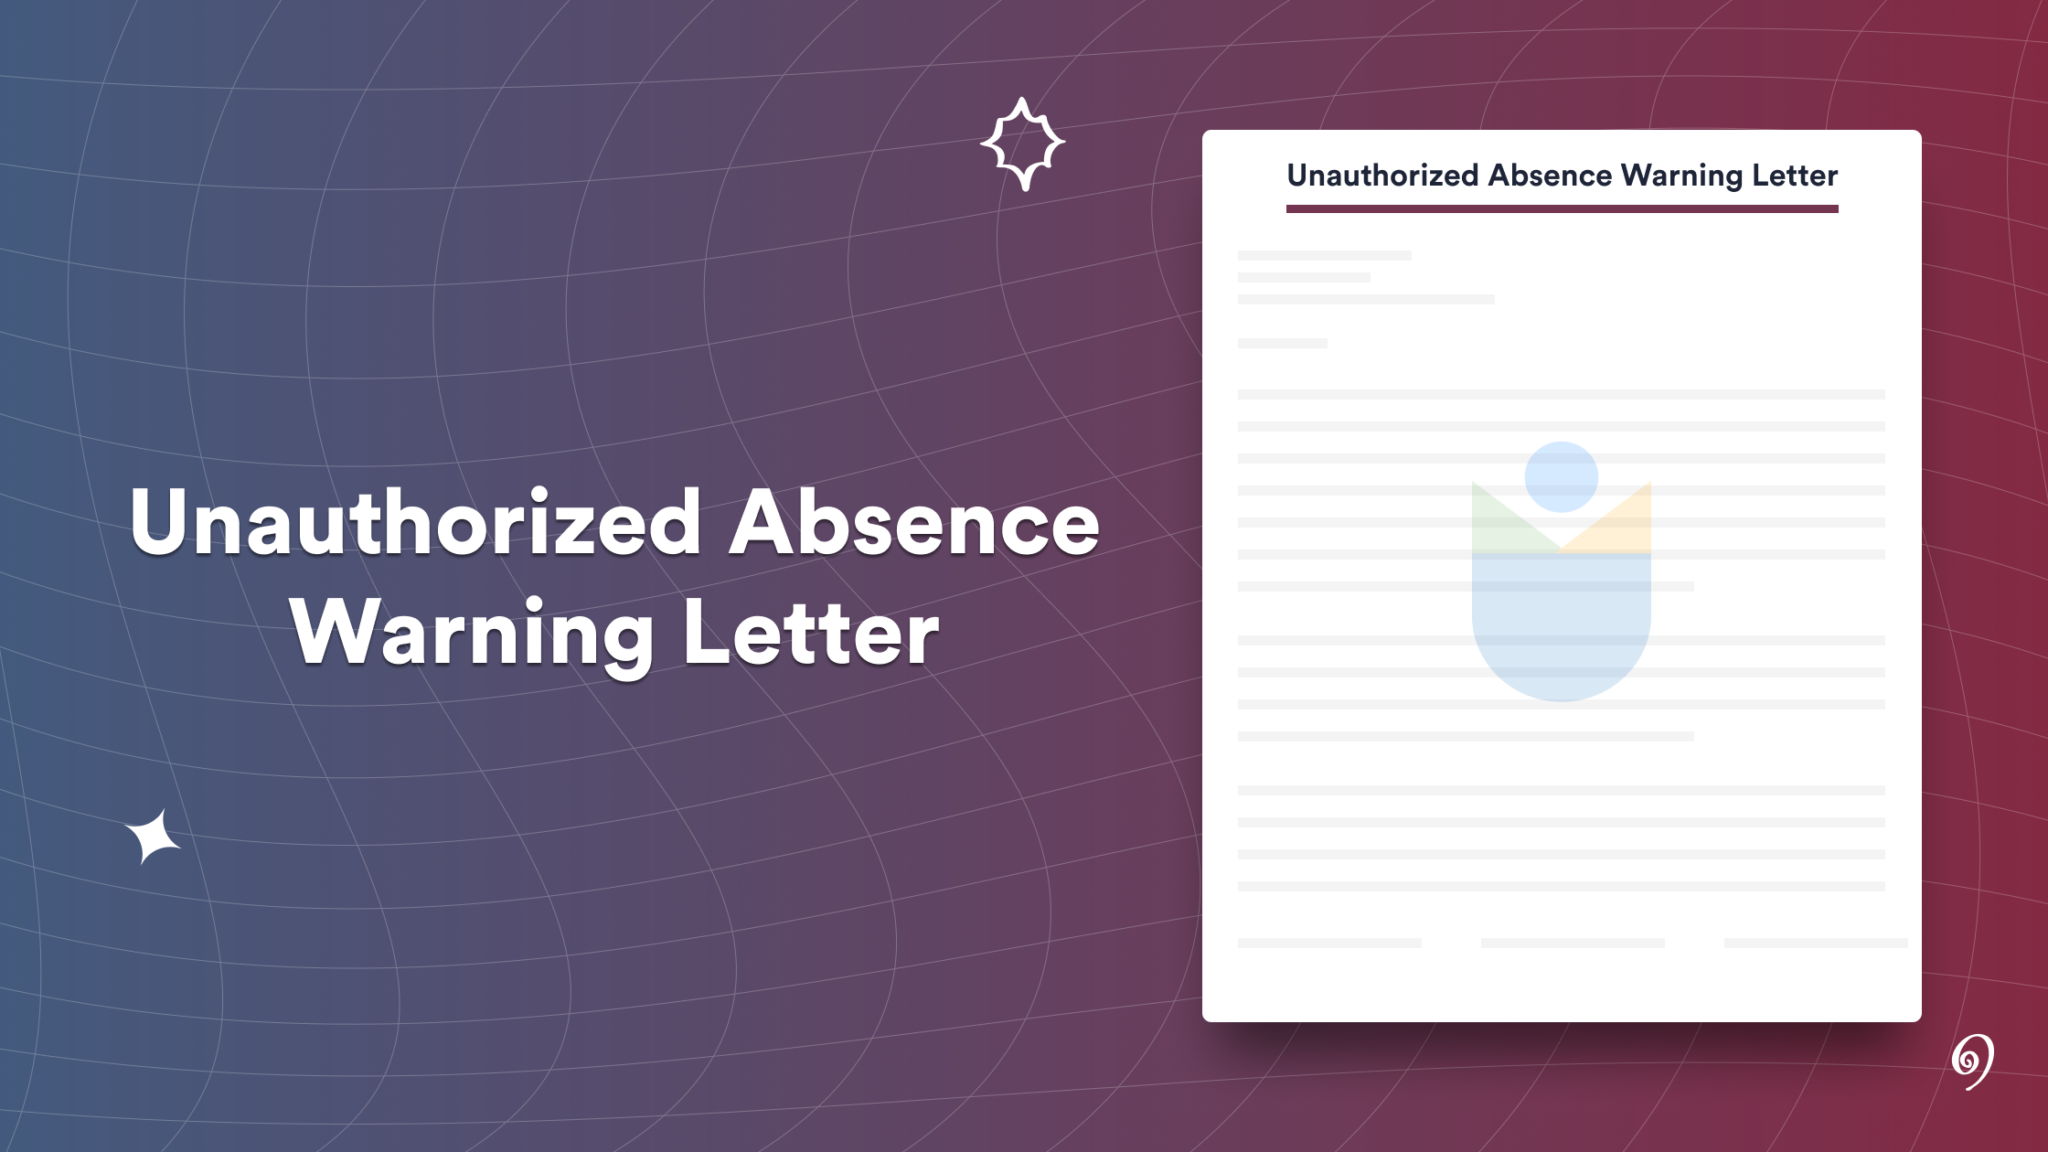 Unauthorized Absence Warning Letter Format, Meaning, Template